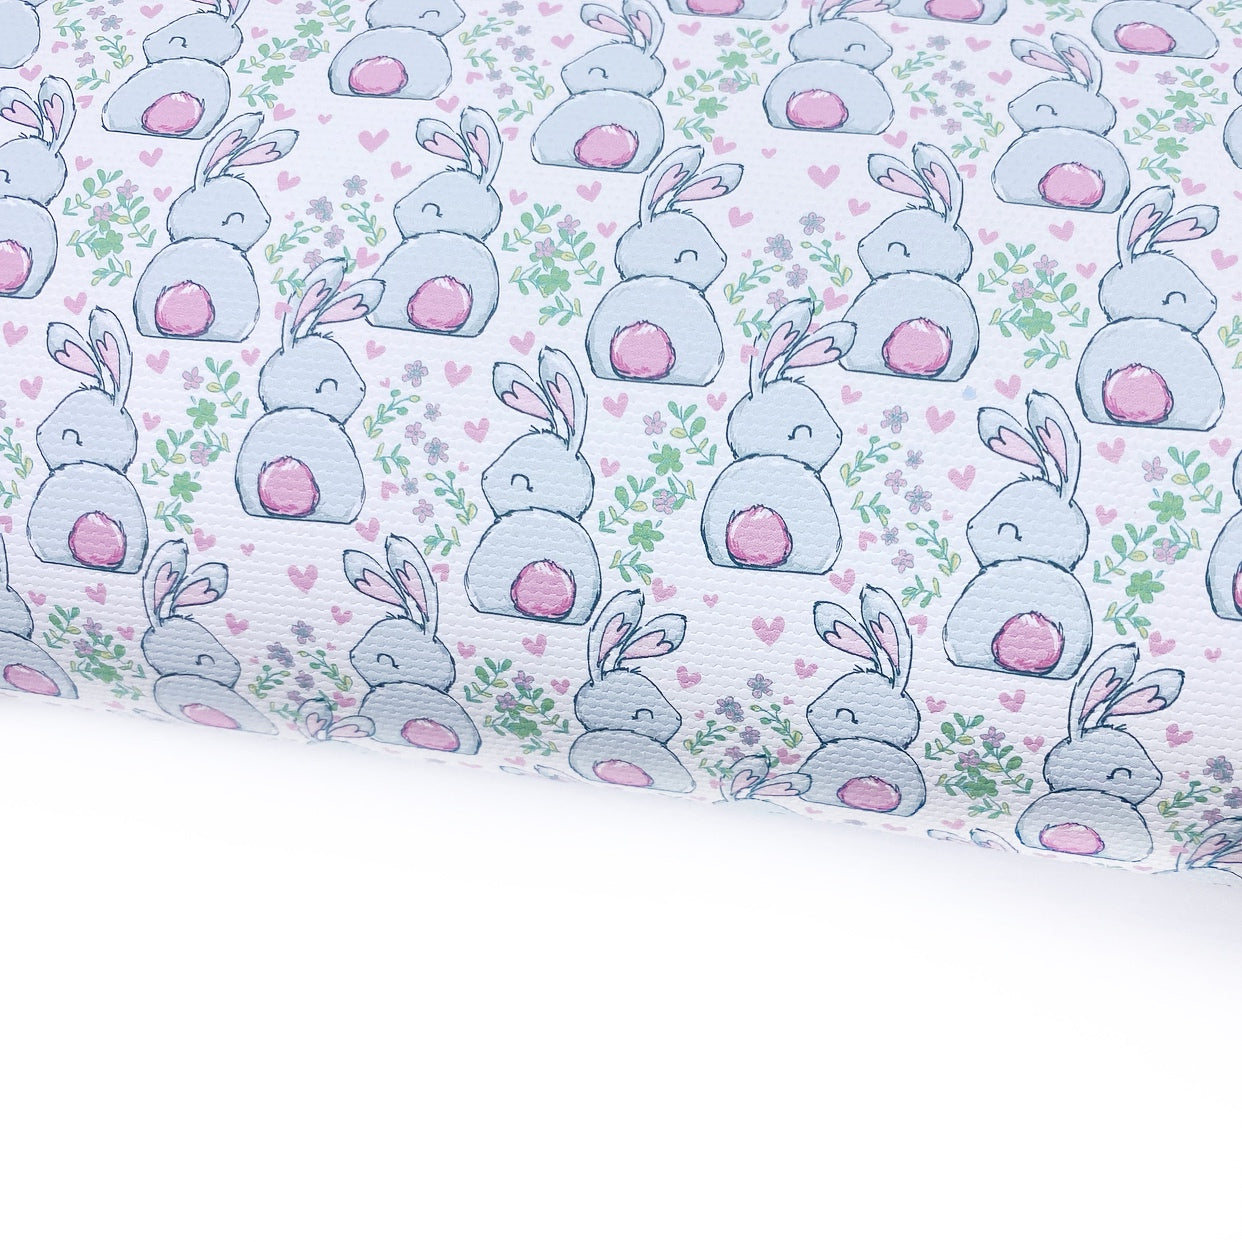 Hop Hop Bunny Tails Lux Premium Printed Bow Fabric